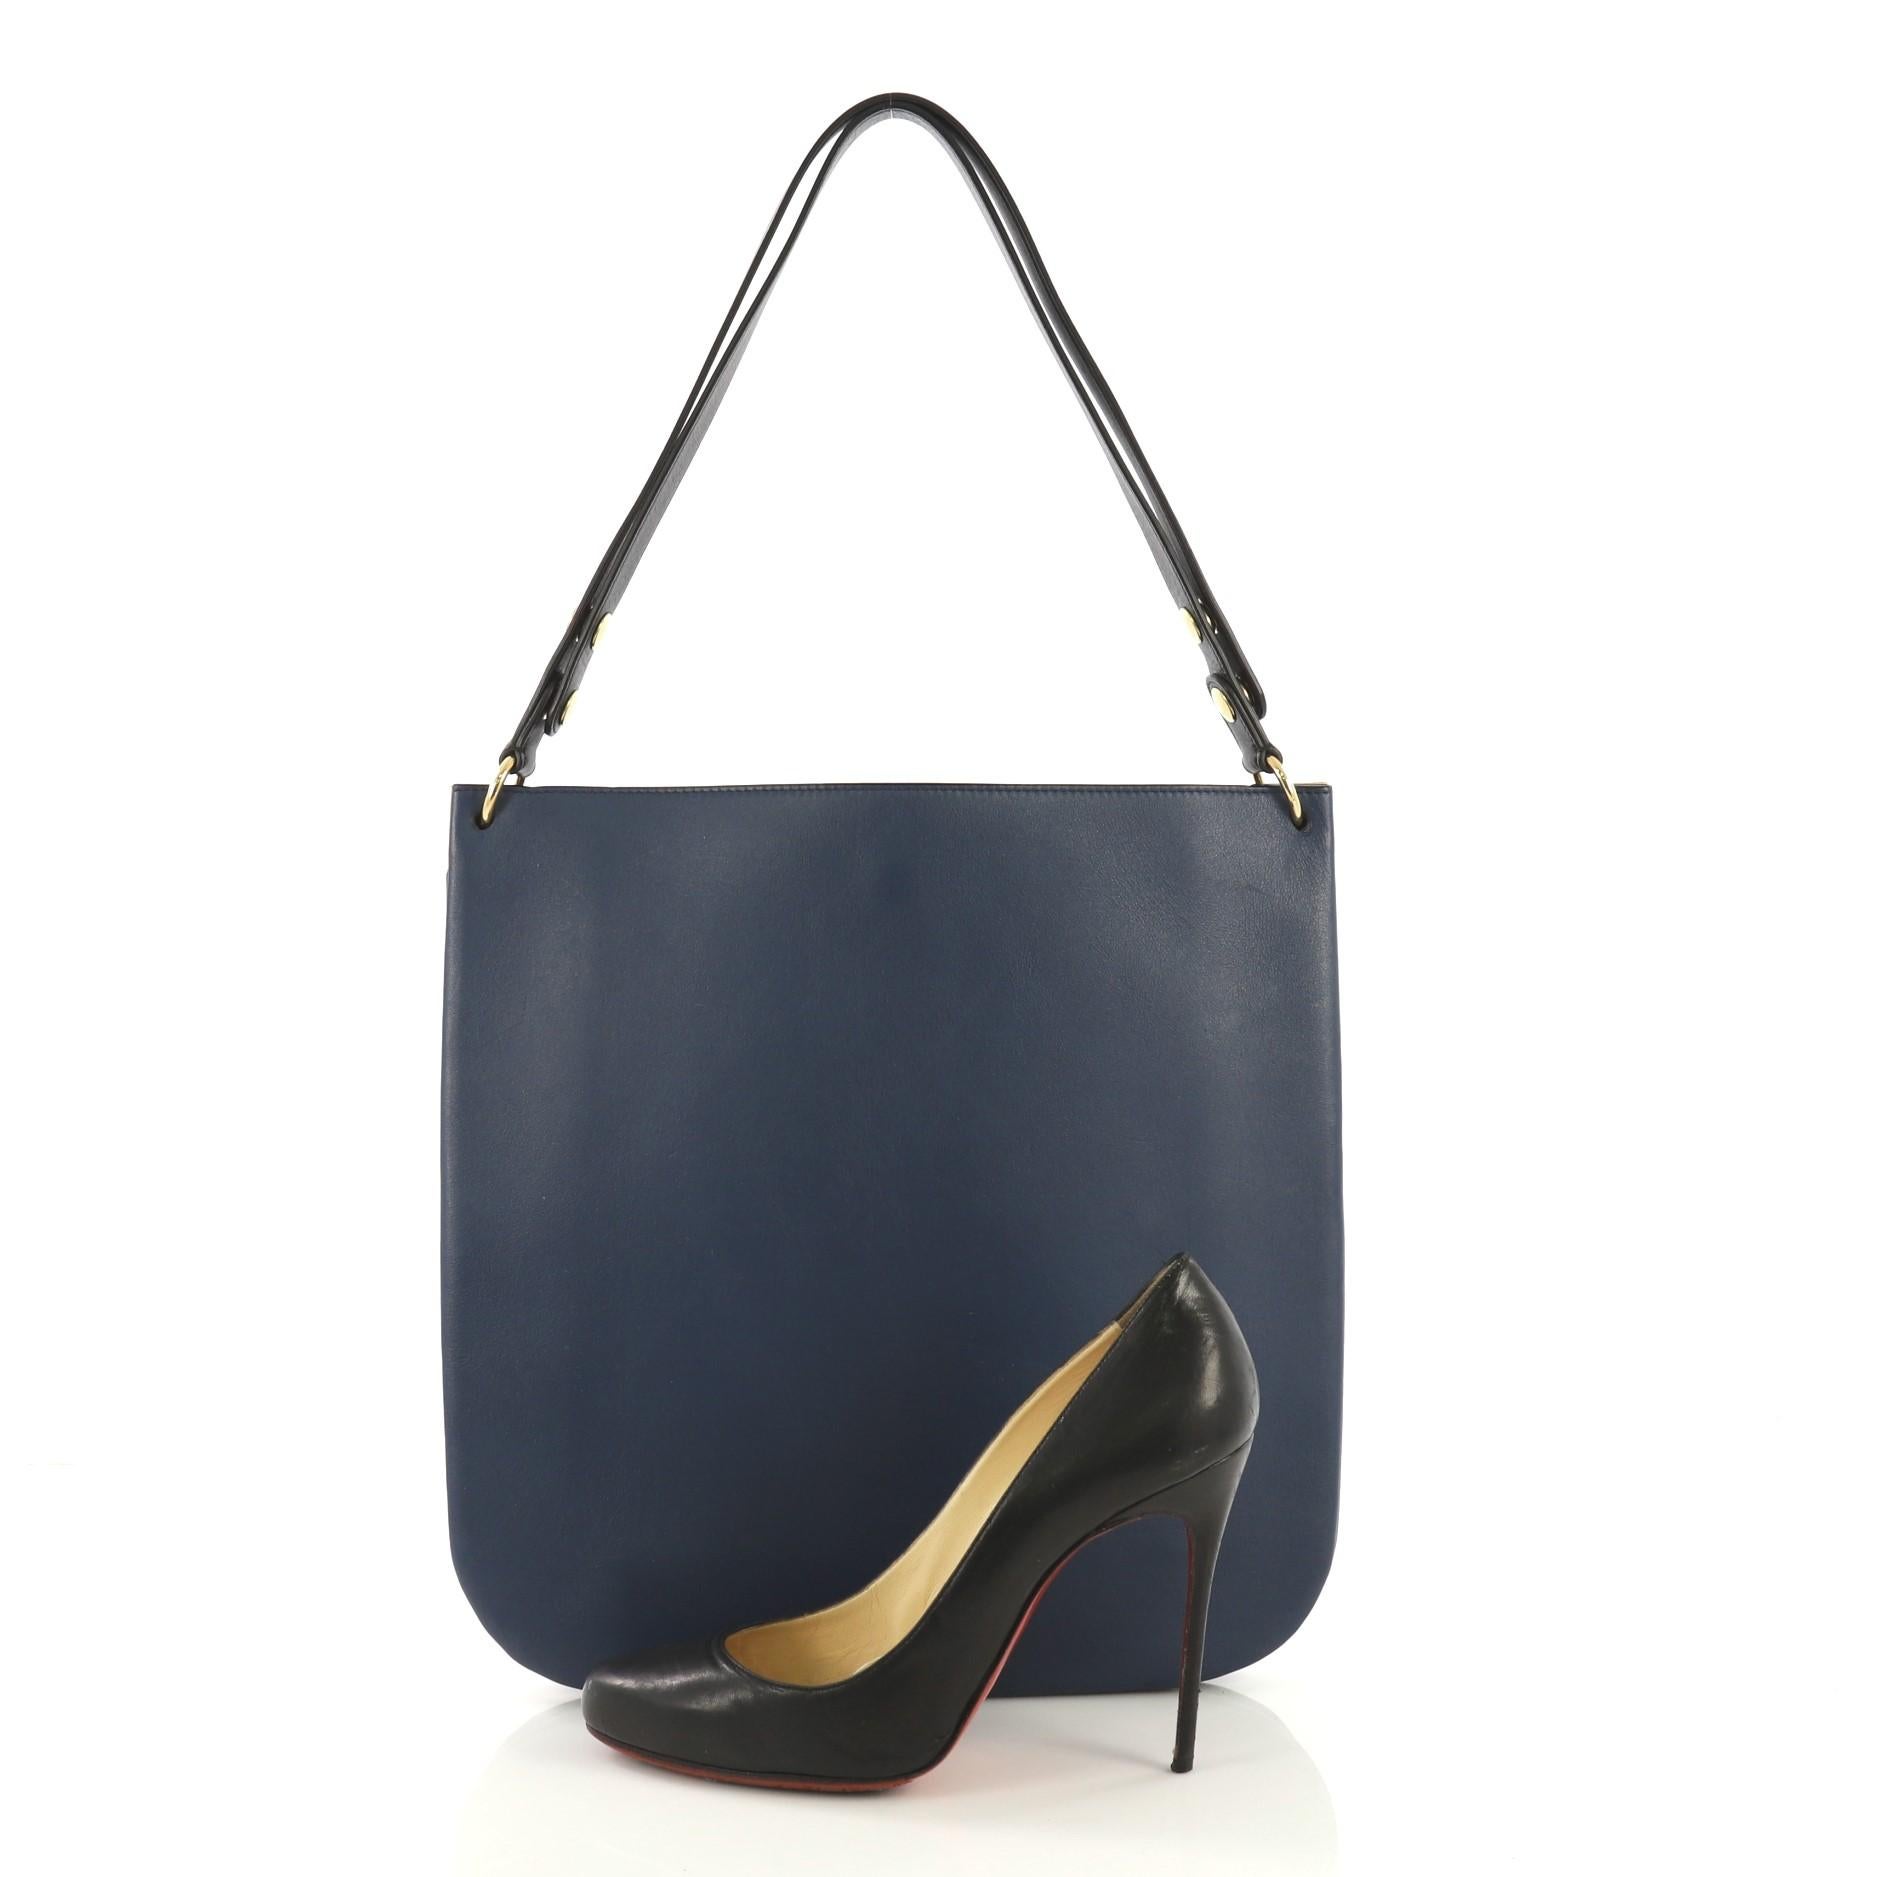 This Celine Blade Hobo Leather, crafted in blue leather, features a leather shoulder strap and gold-tone hardware. It opens to a black leather interior with three compartments, one with snap closure. **Note: Shoe photographed is used as a sizing